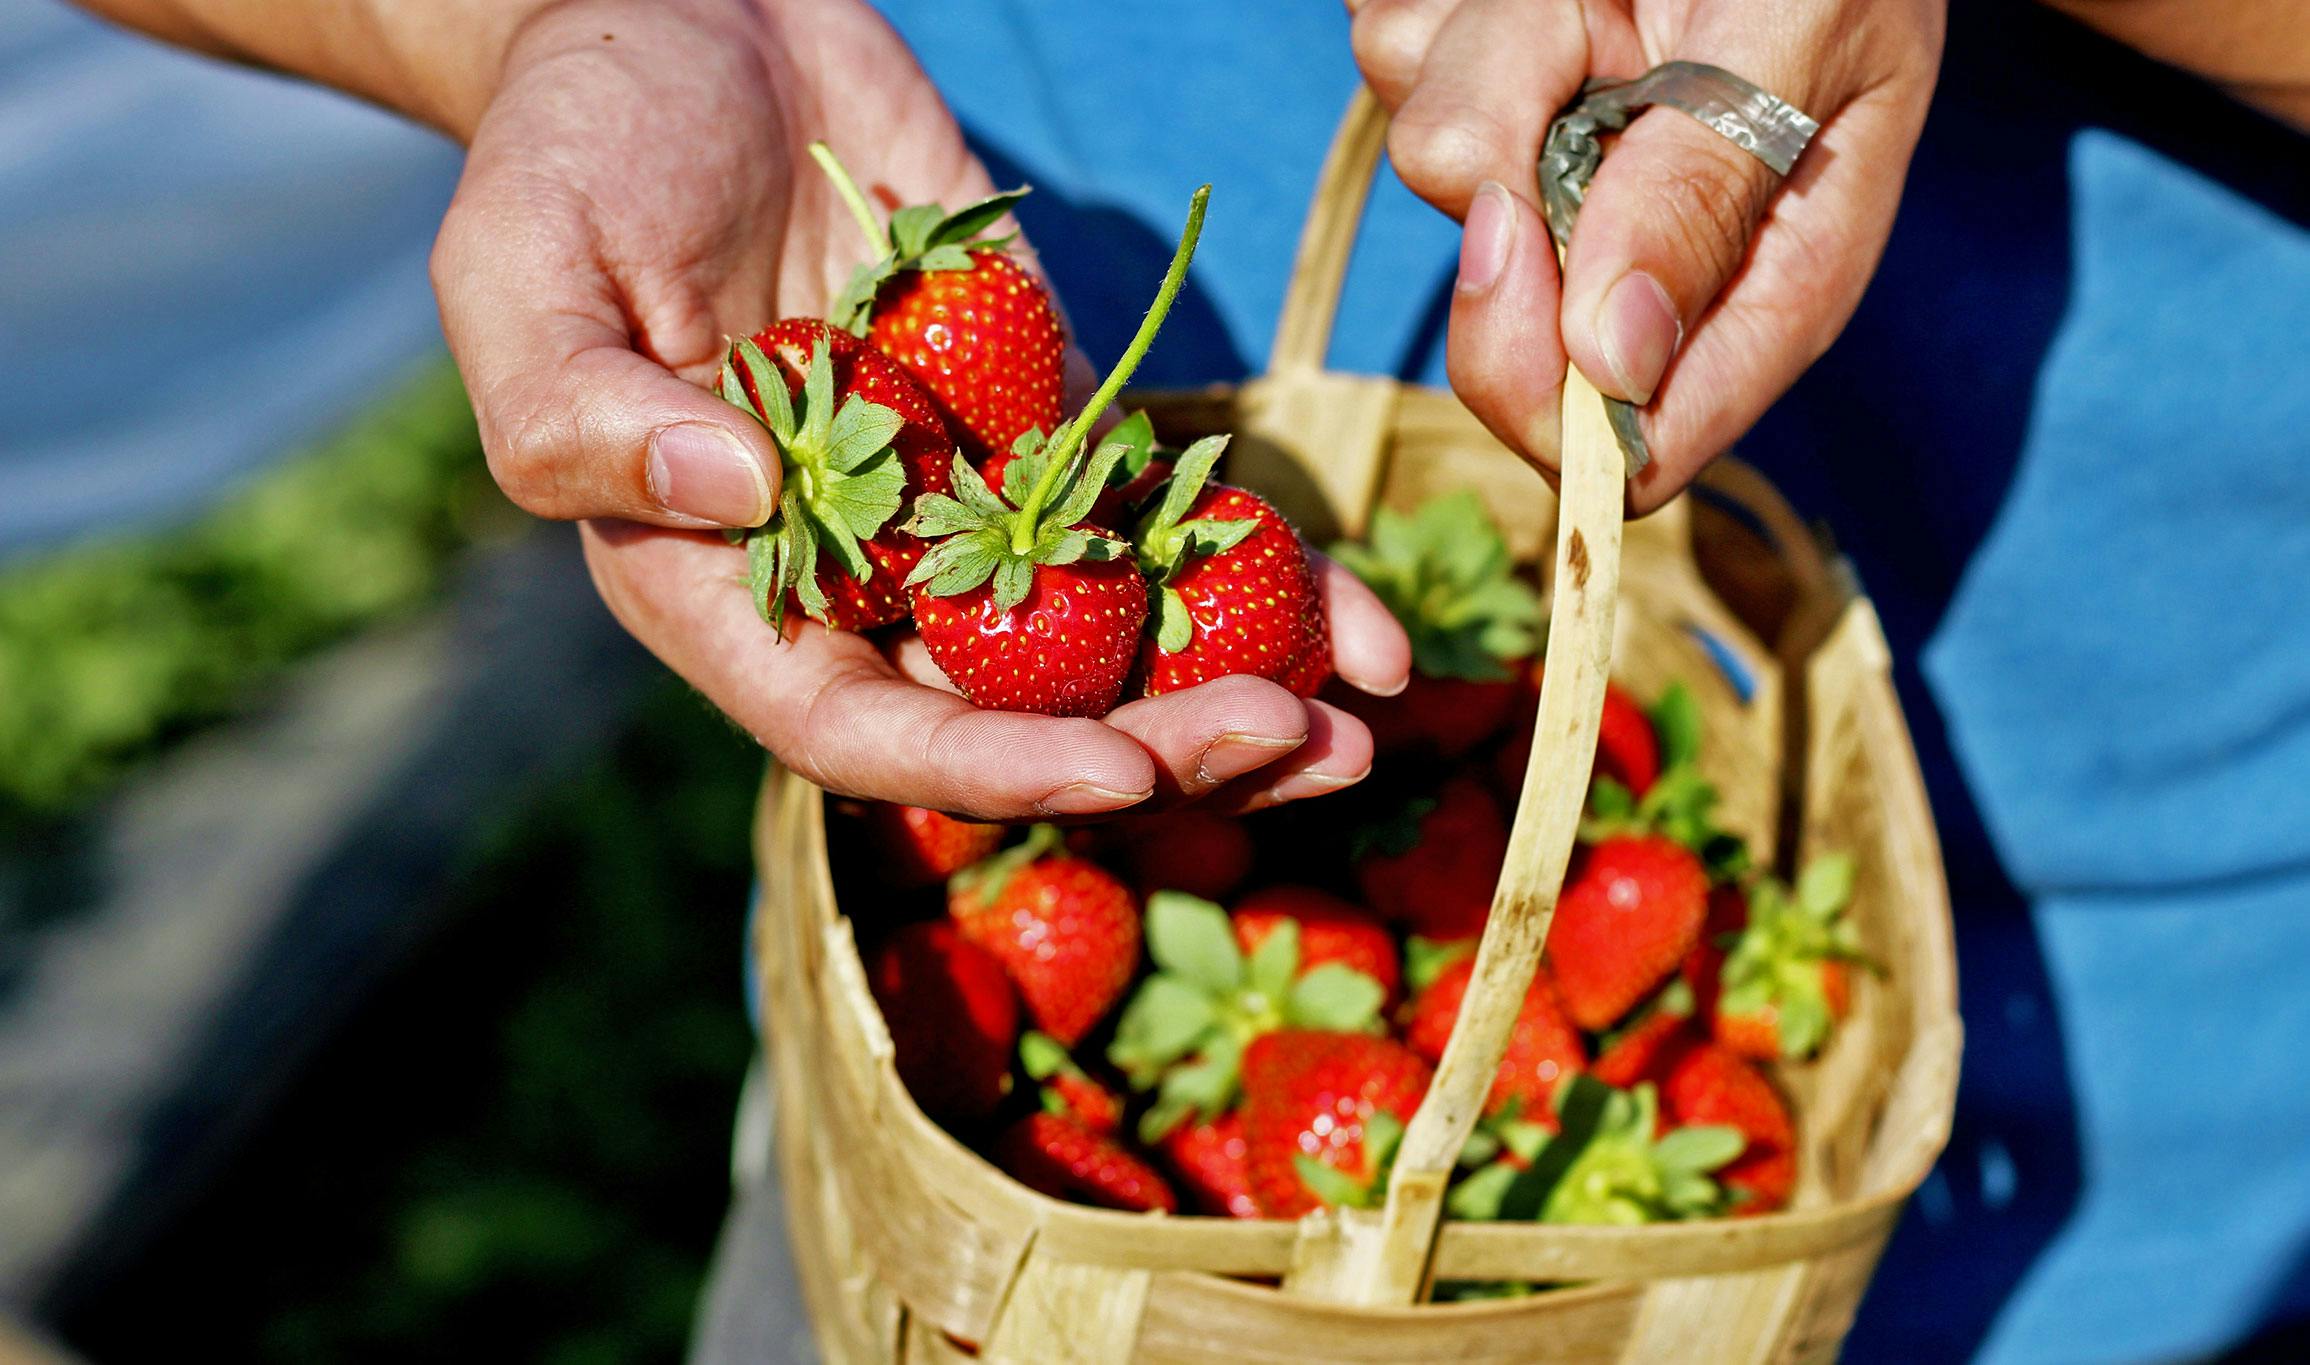 Fresh strawberries from a farm in Benguet